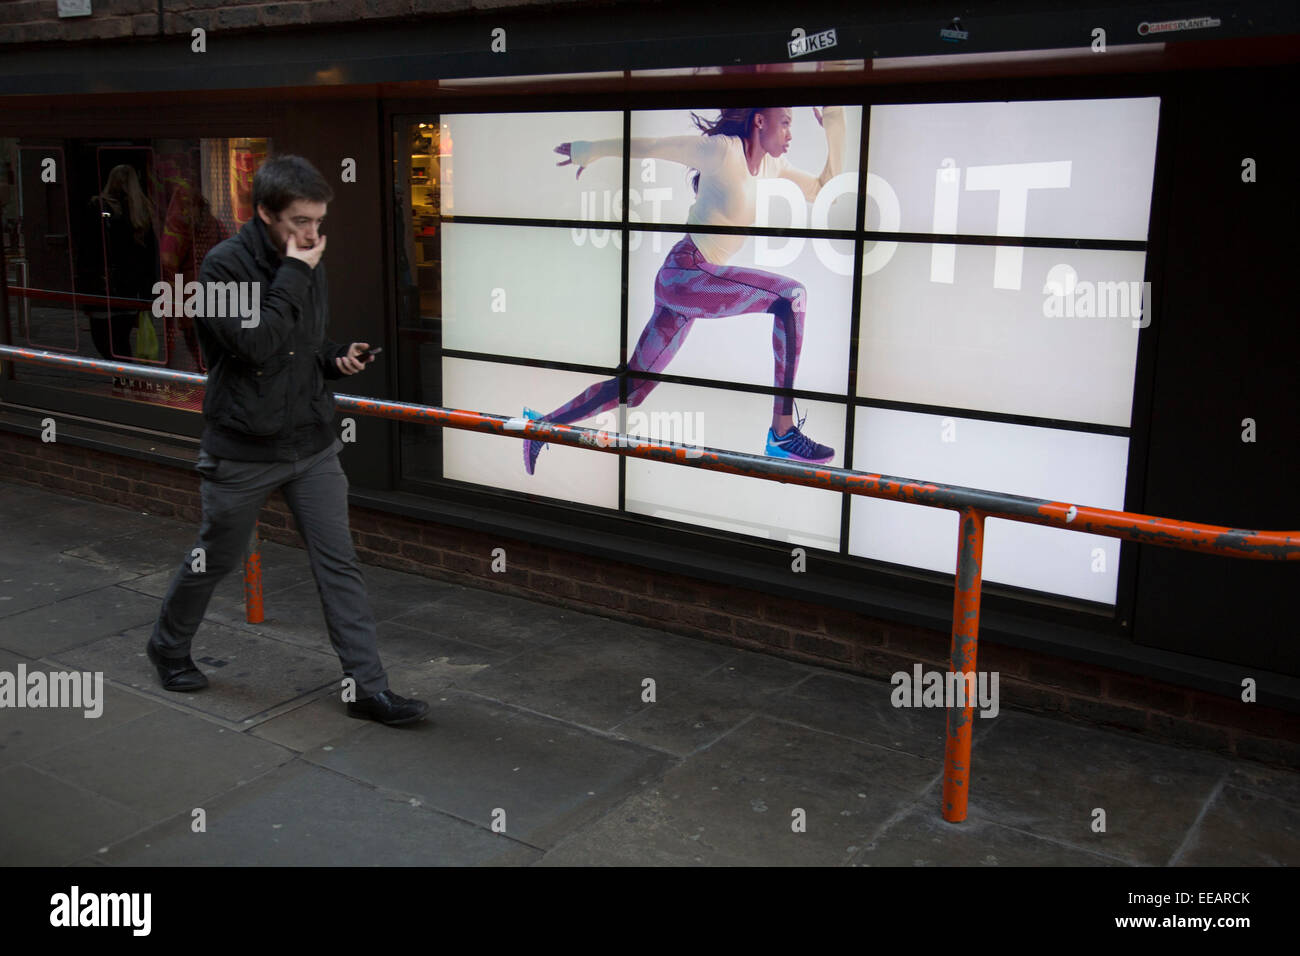 Nike advertising runner runs along a barrier near unsuspecting people. The  video advert with the slogan 'Just Do It" with a woman running across the  screen makes for an optical illusion of